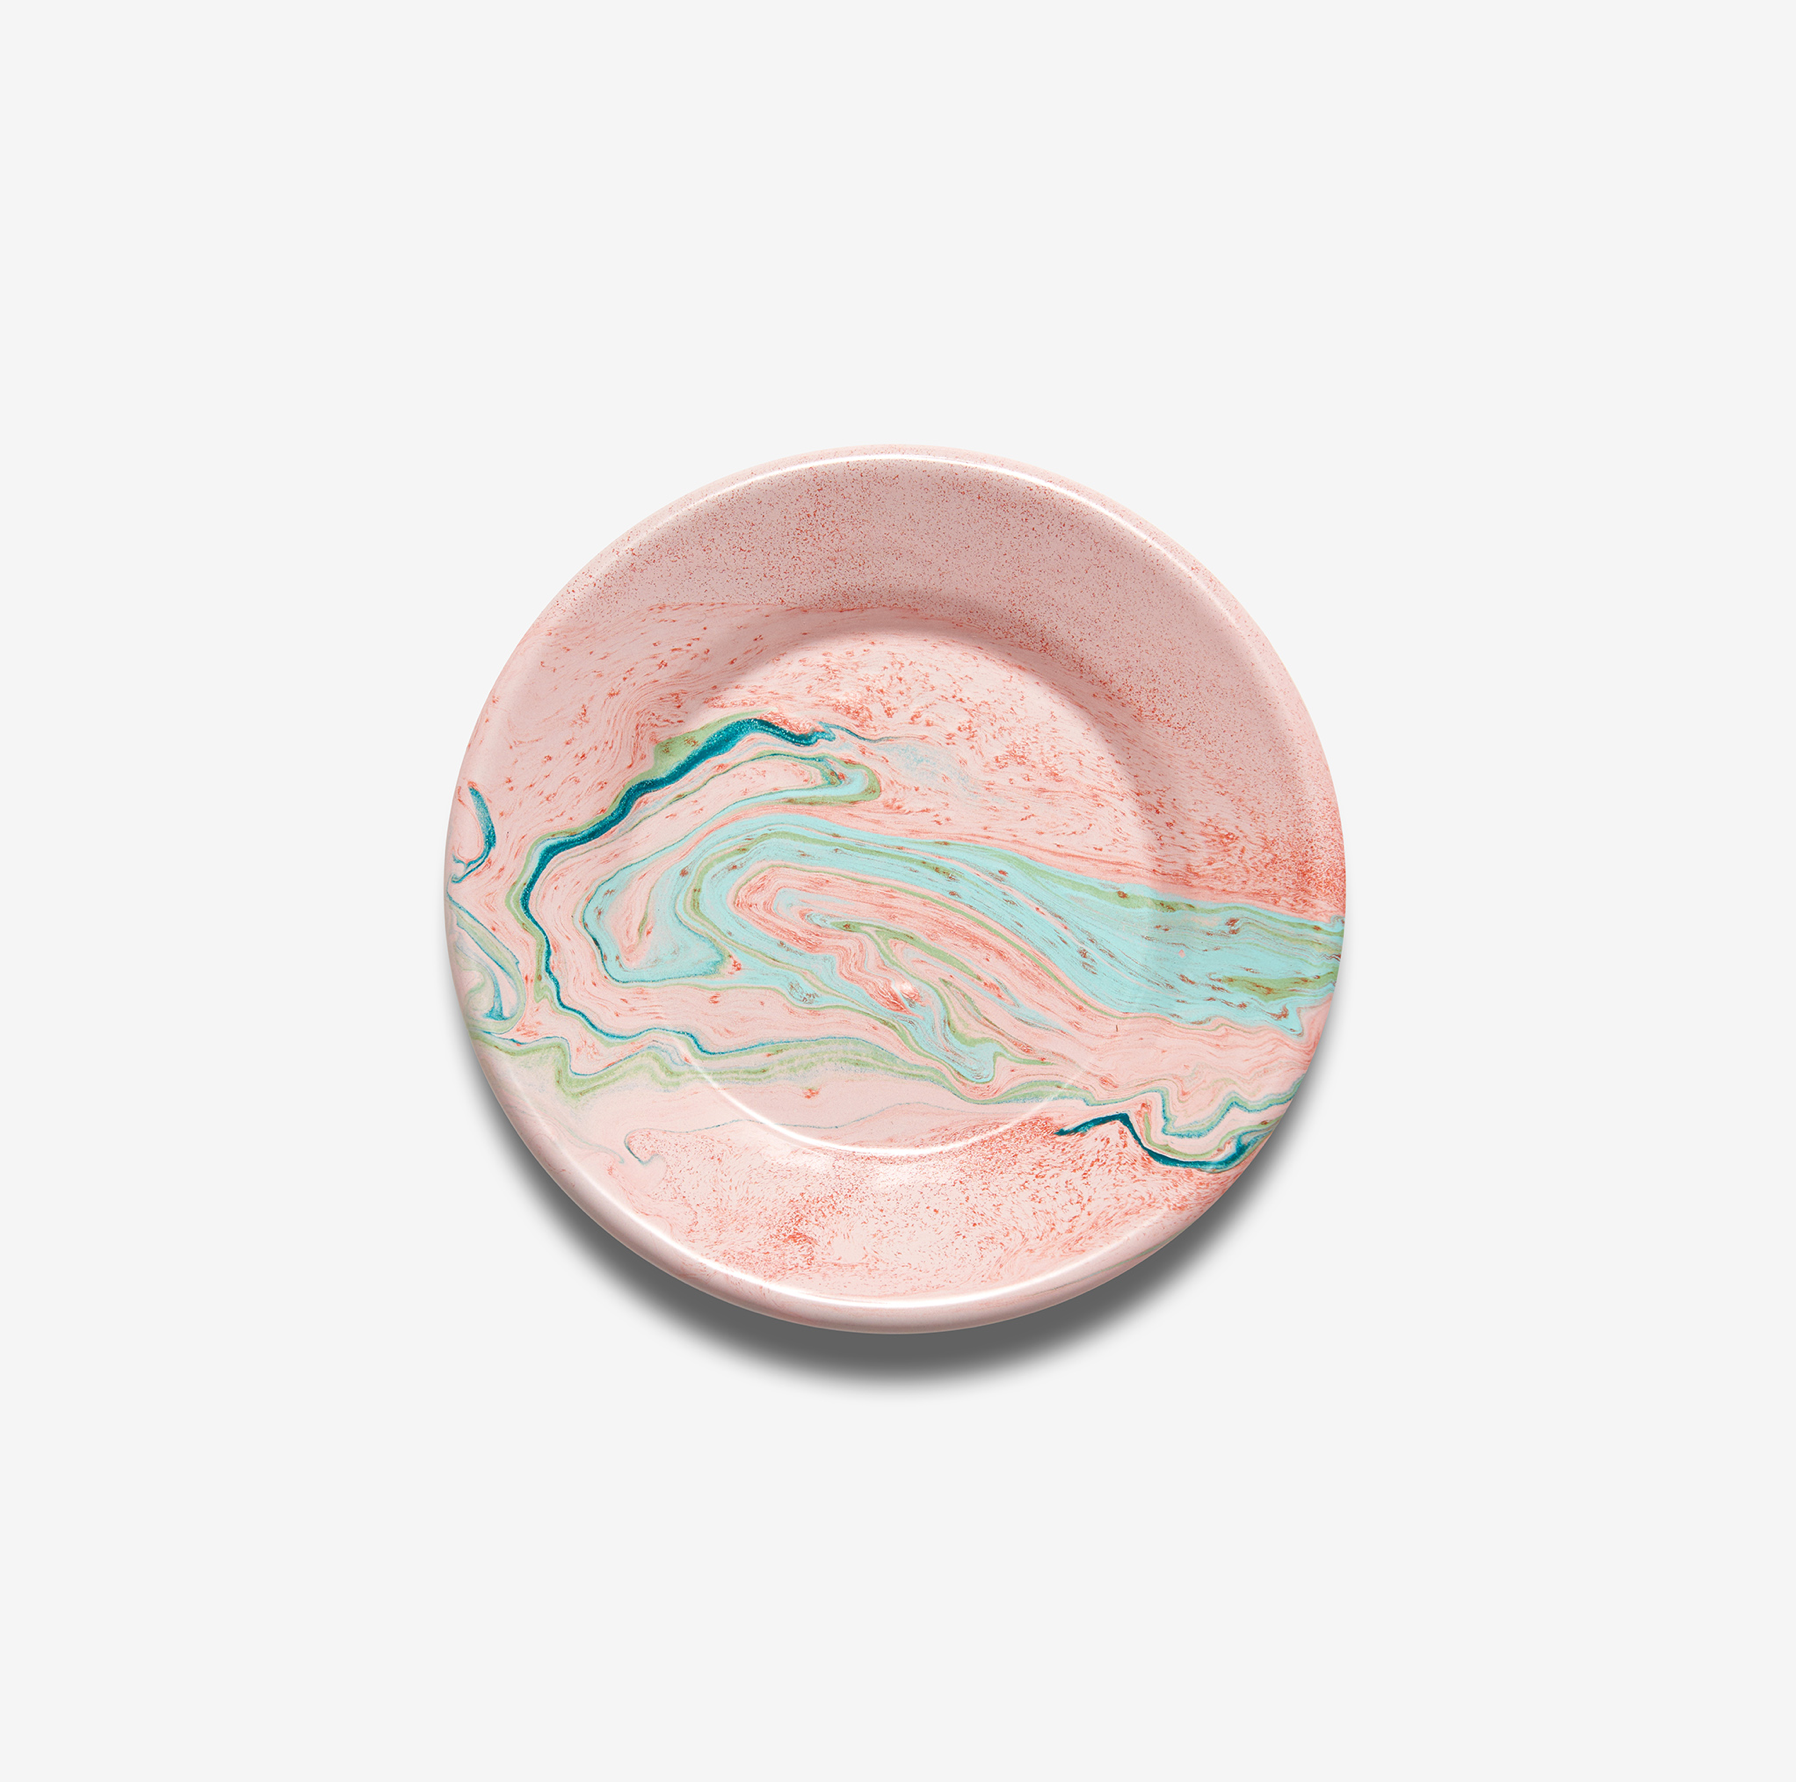  enamel lunch plate in Blush color is from the Multi Swirl collection by Bornn Enamelware